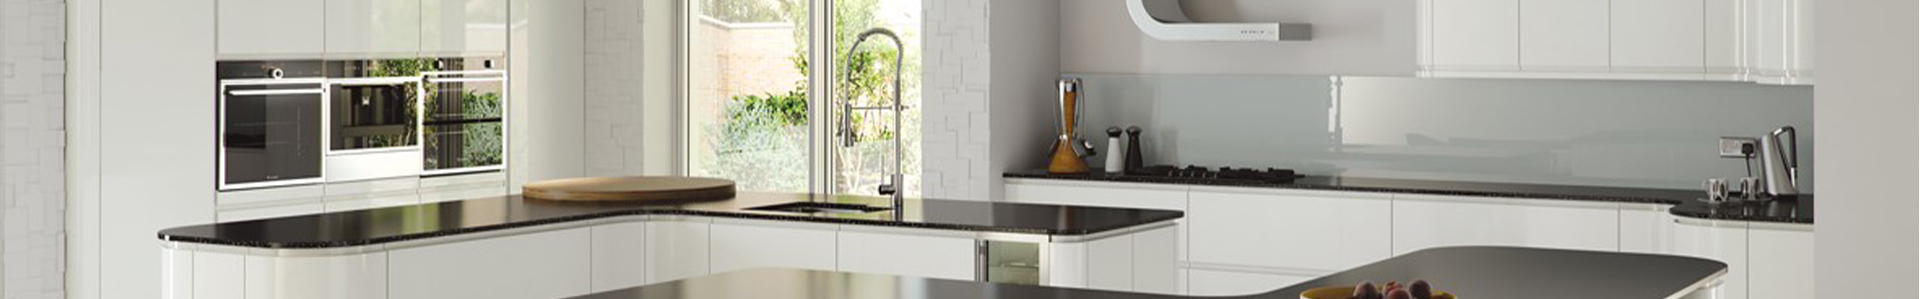 Modern style shaker kitchen cabinets, custom kitchen wall cabinets, grey and white kitchens